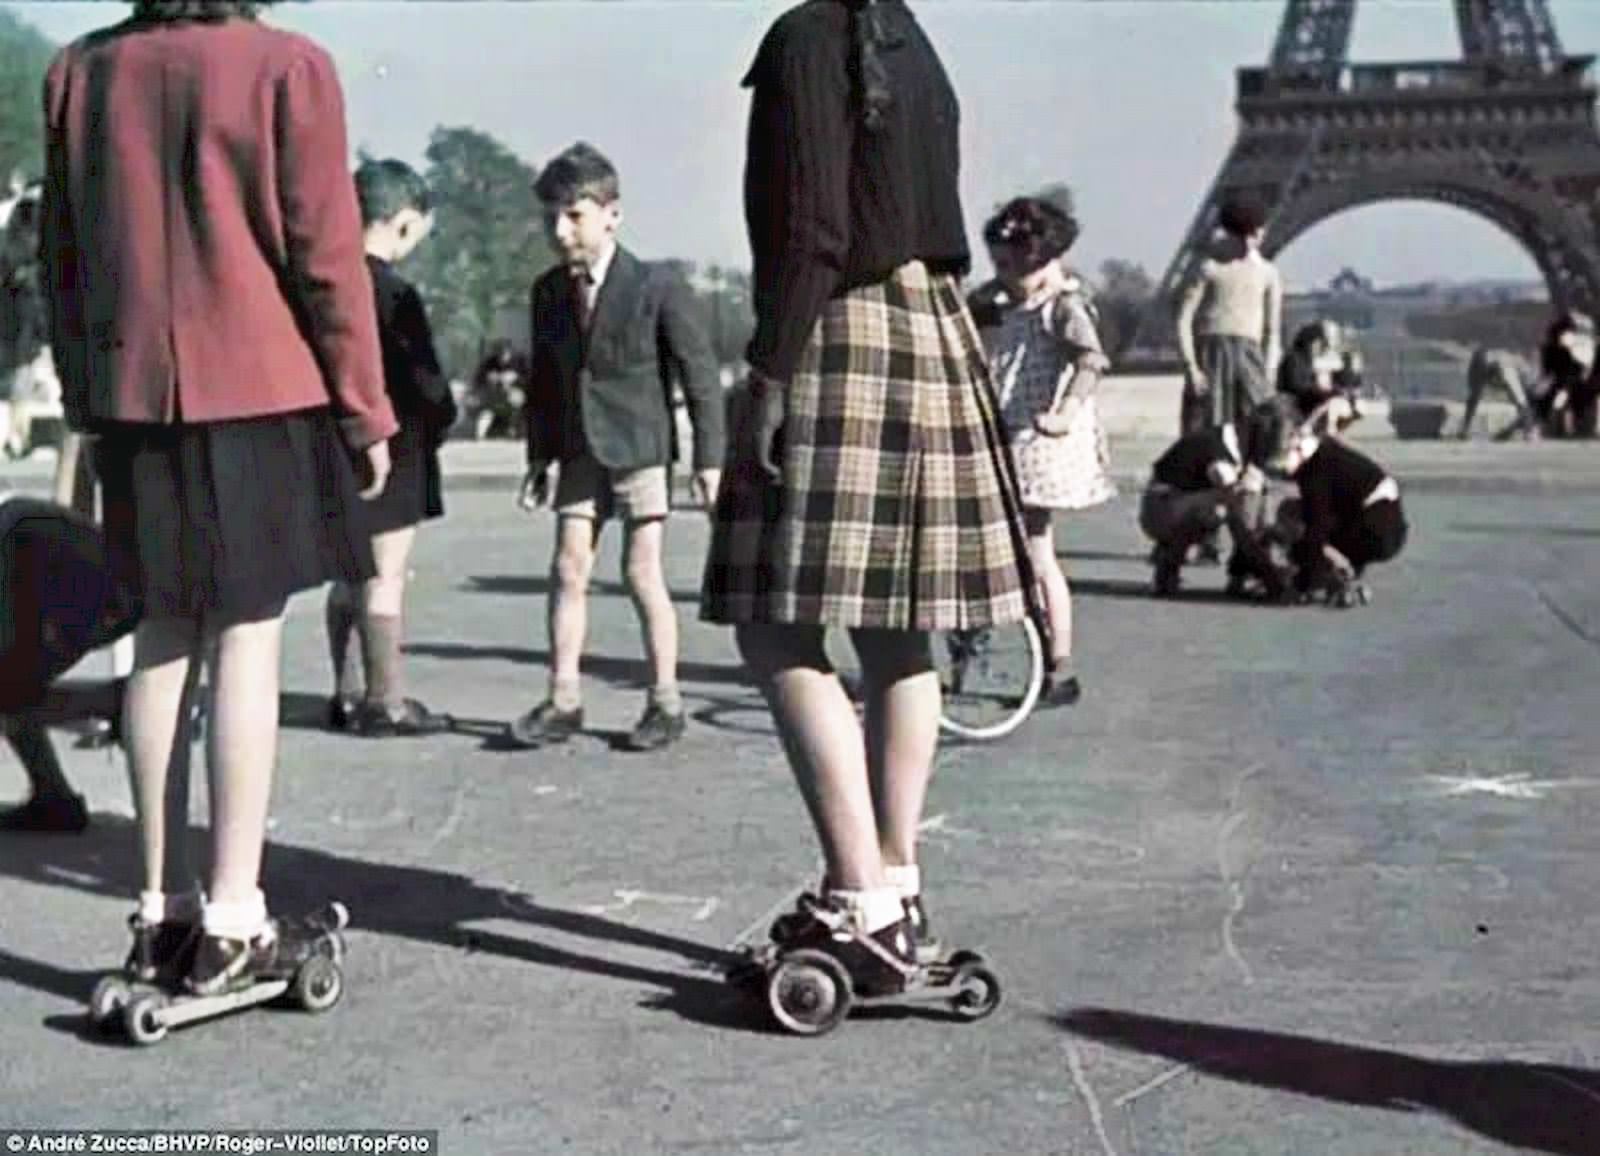 Girls and boys play in what appear to be the early forerunners of rollerskates against the backdrop of the Eiffel Tower on central Paris’s Champ de Mars.